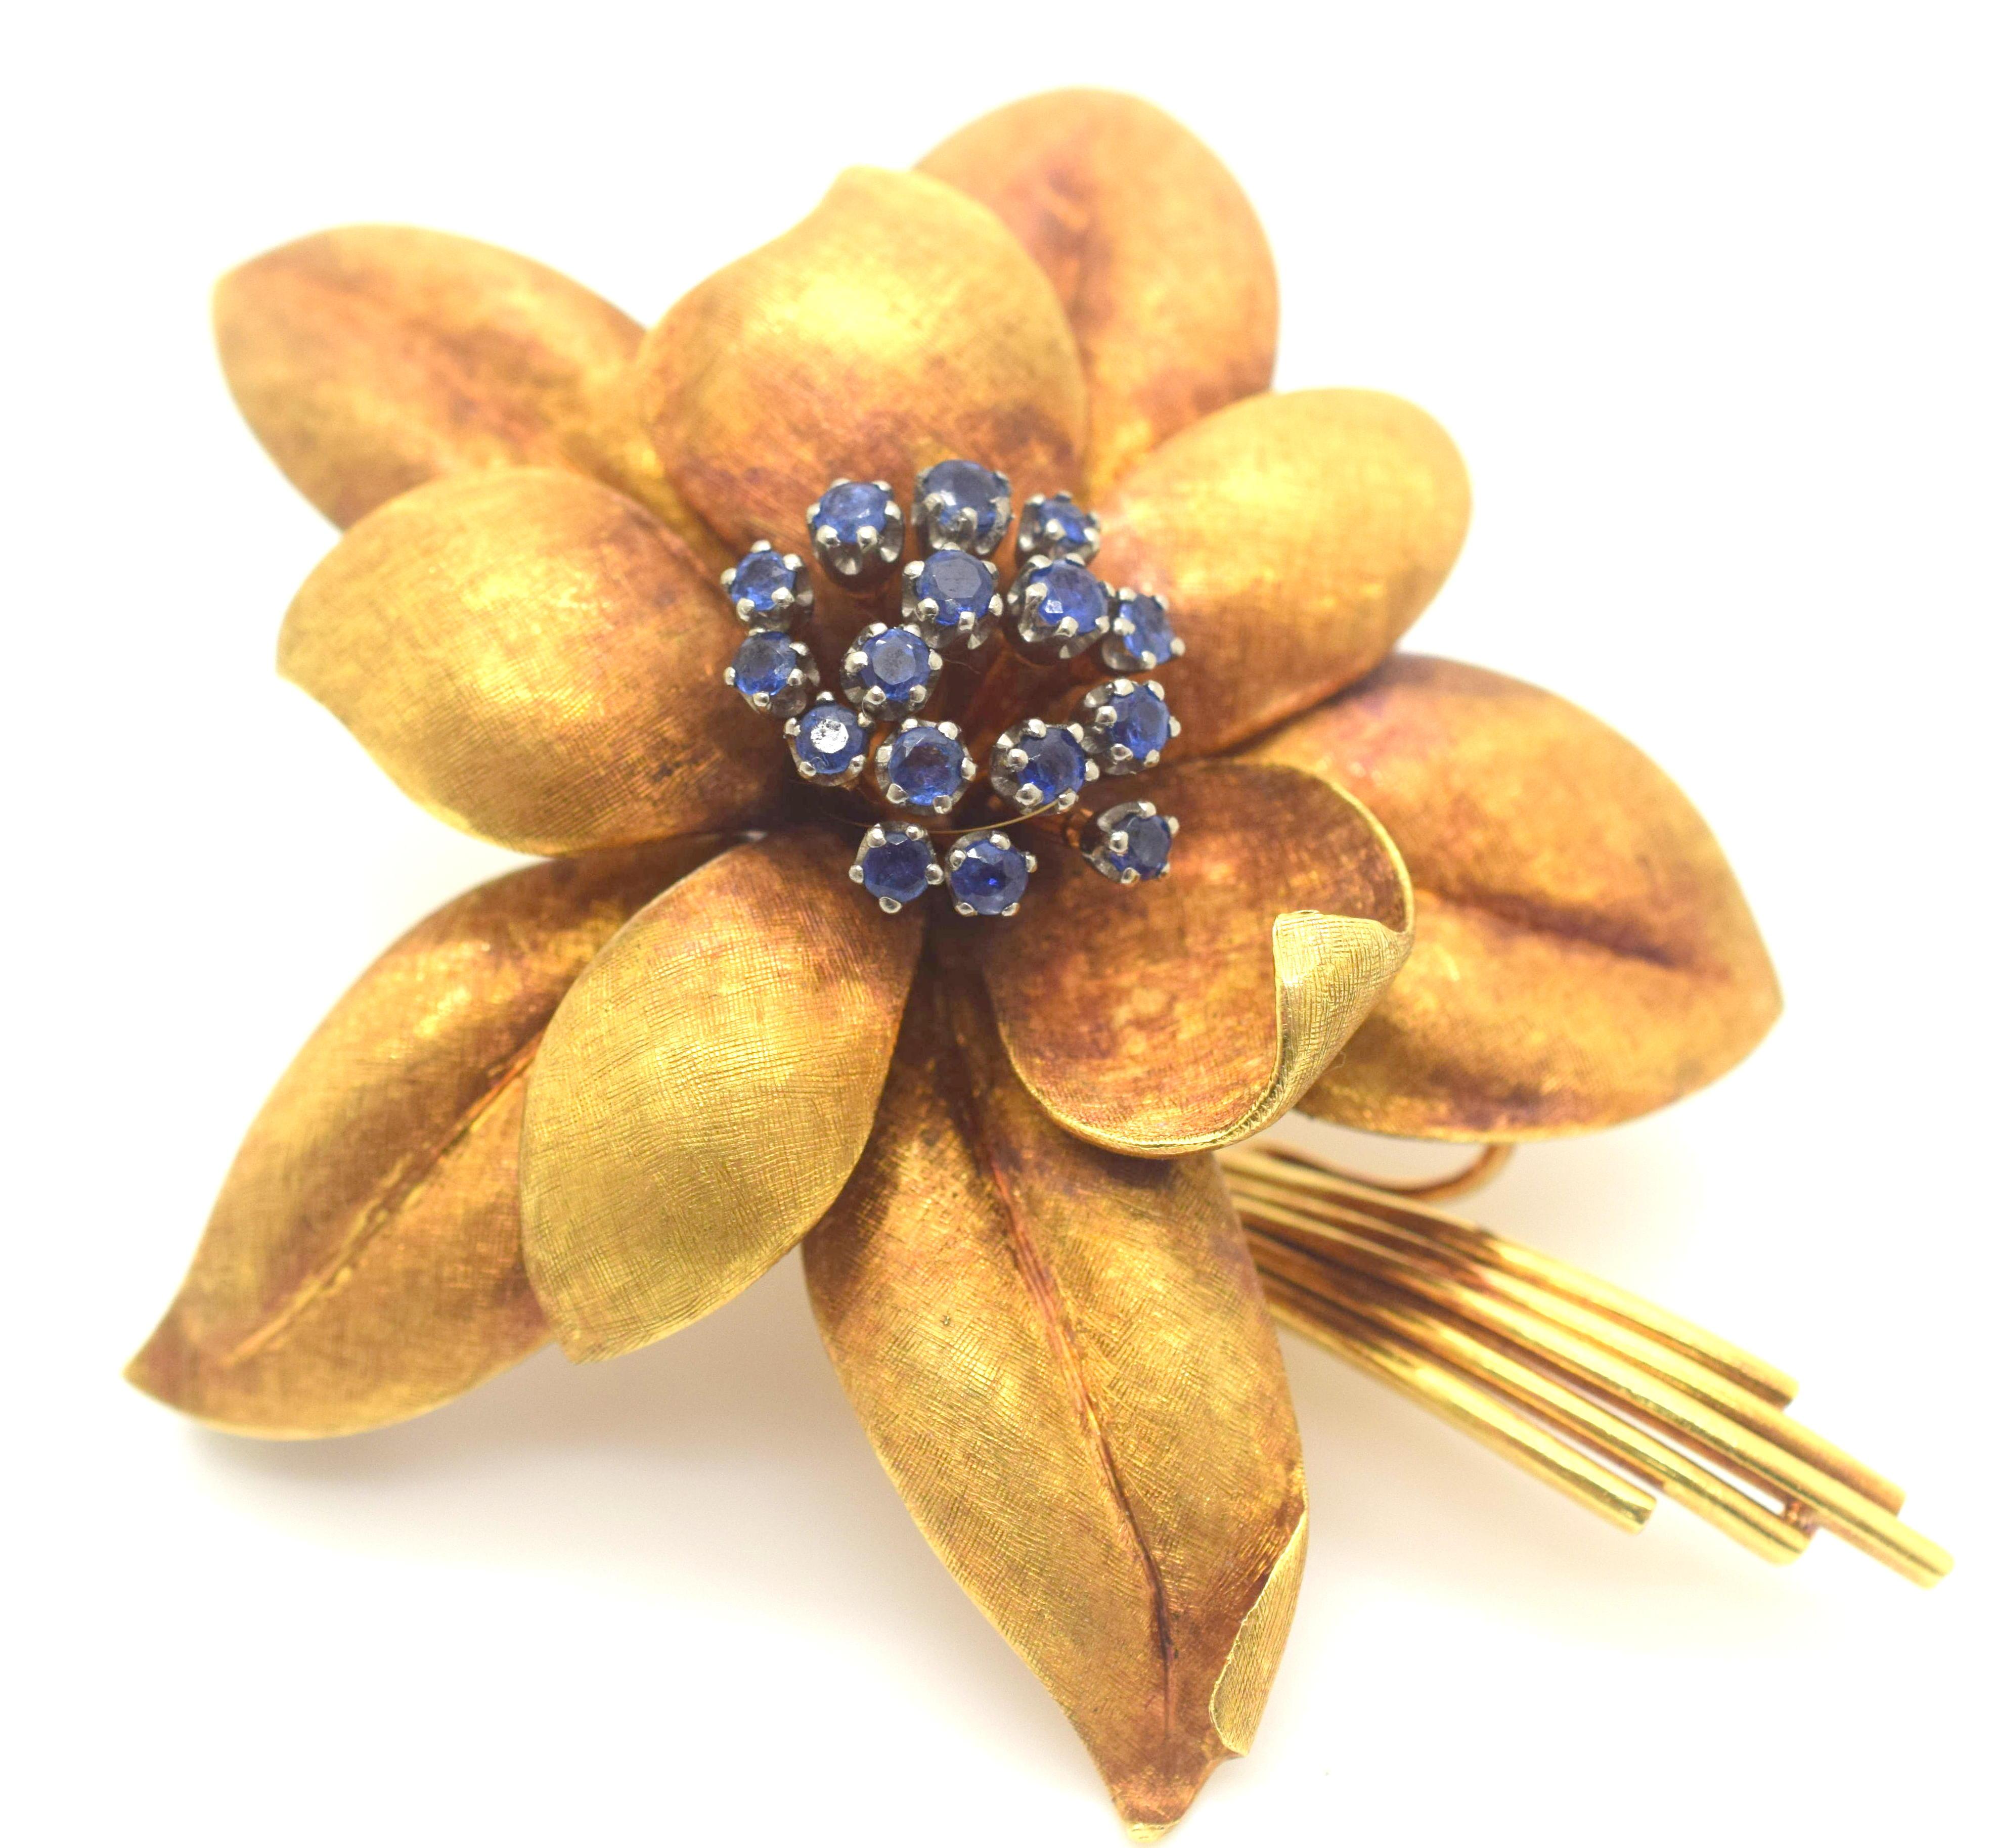 Estate floral brooch crafted in 18k yellow gold. This brooch is a timeless piece of jewelry that is coming back into style. The craftsmanship is exceptional where the leaves of the flower show a textured finish appearing life like. The brooch was